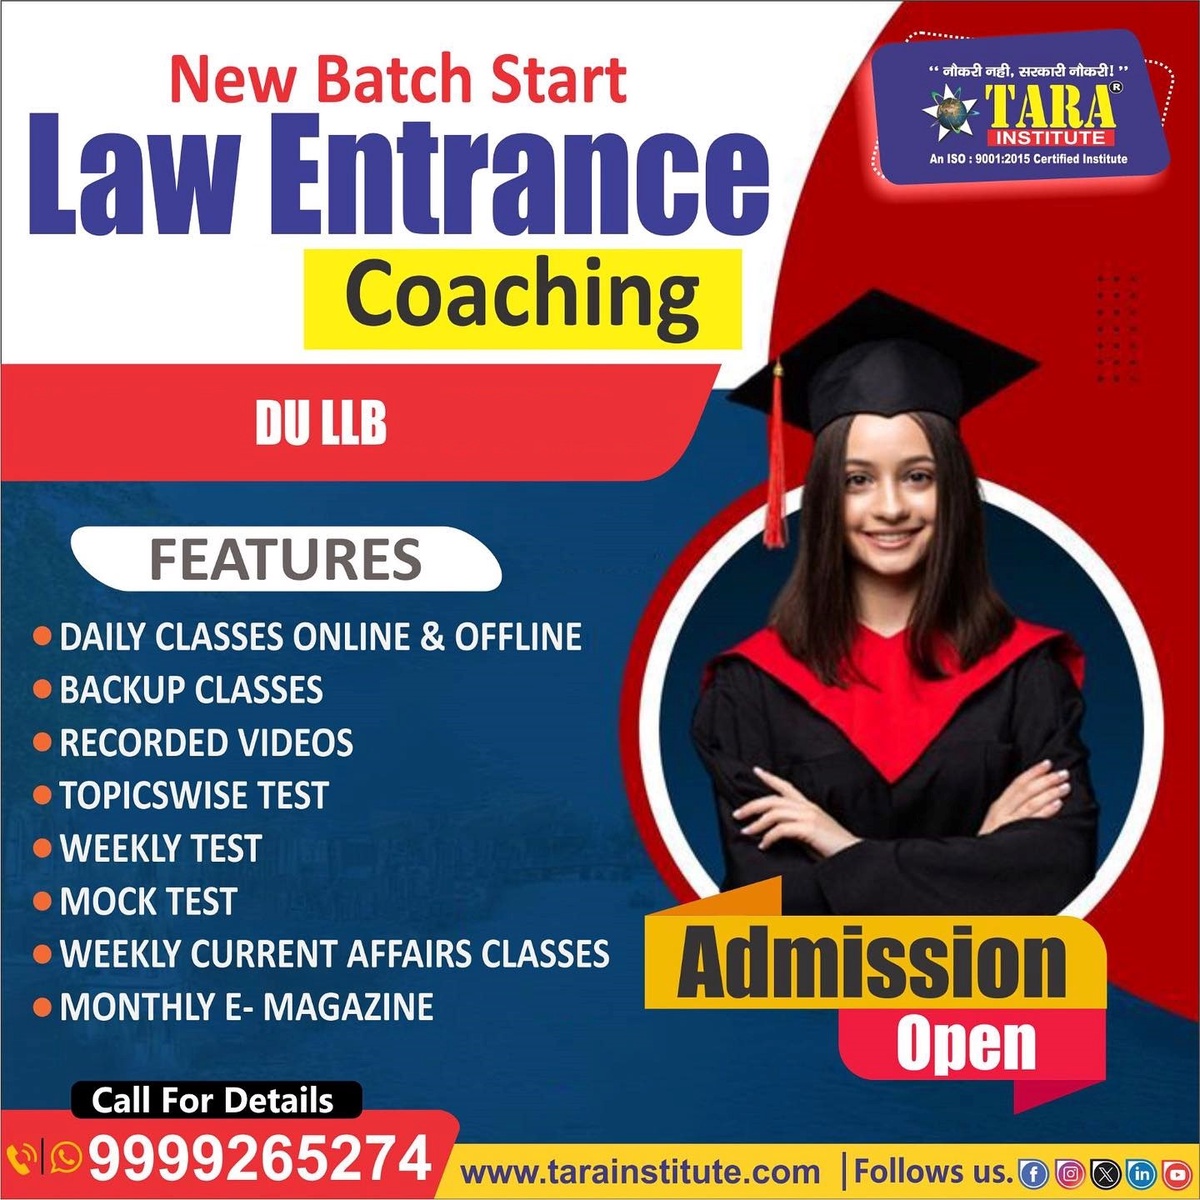 10 Must-Know Tips for DU LLB Entrance Exam Preparation